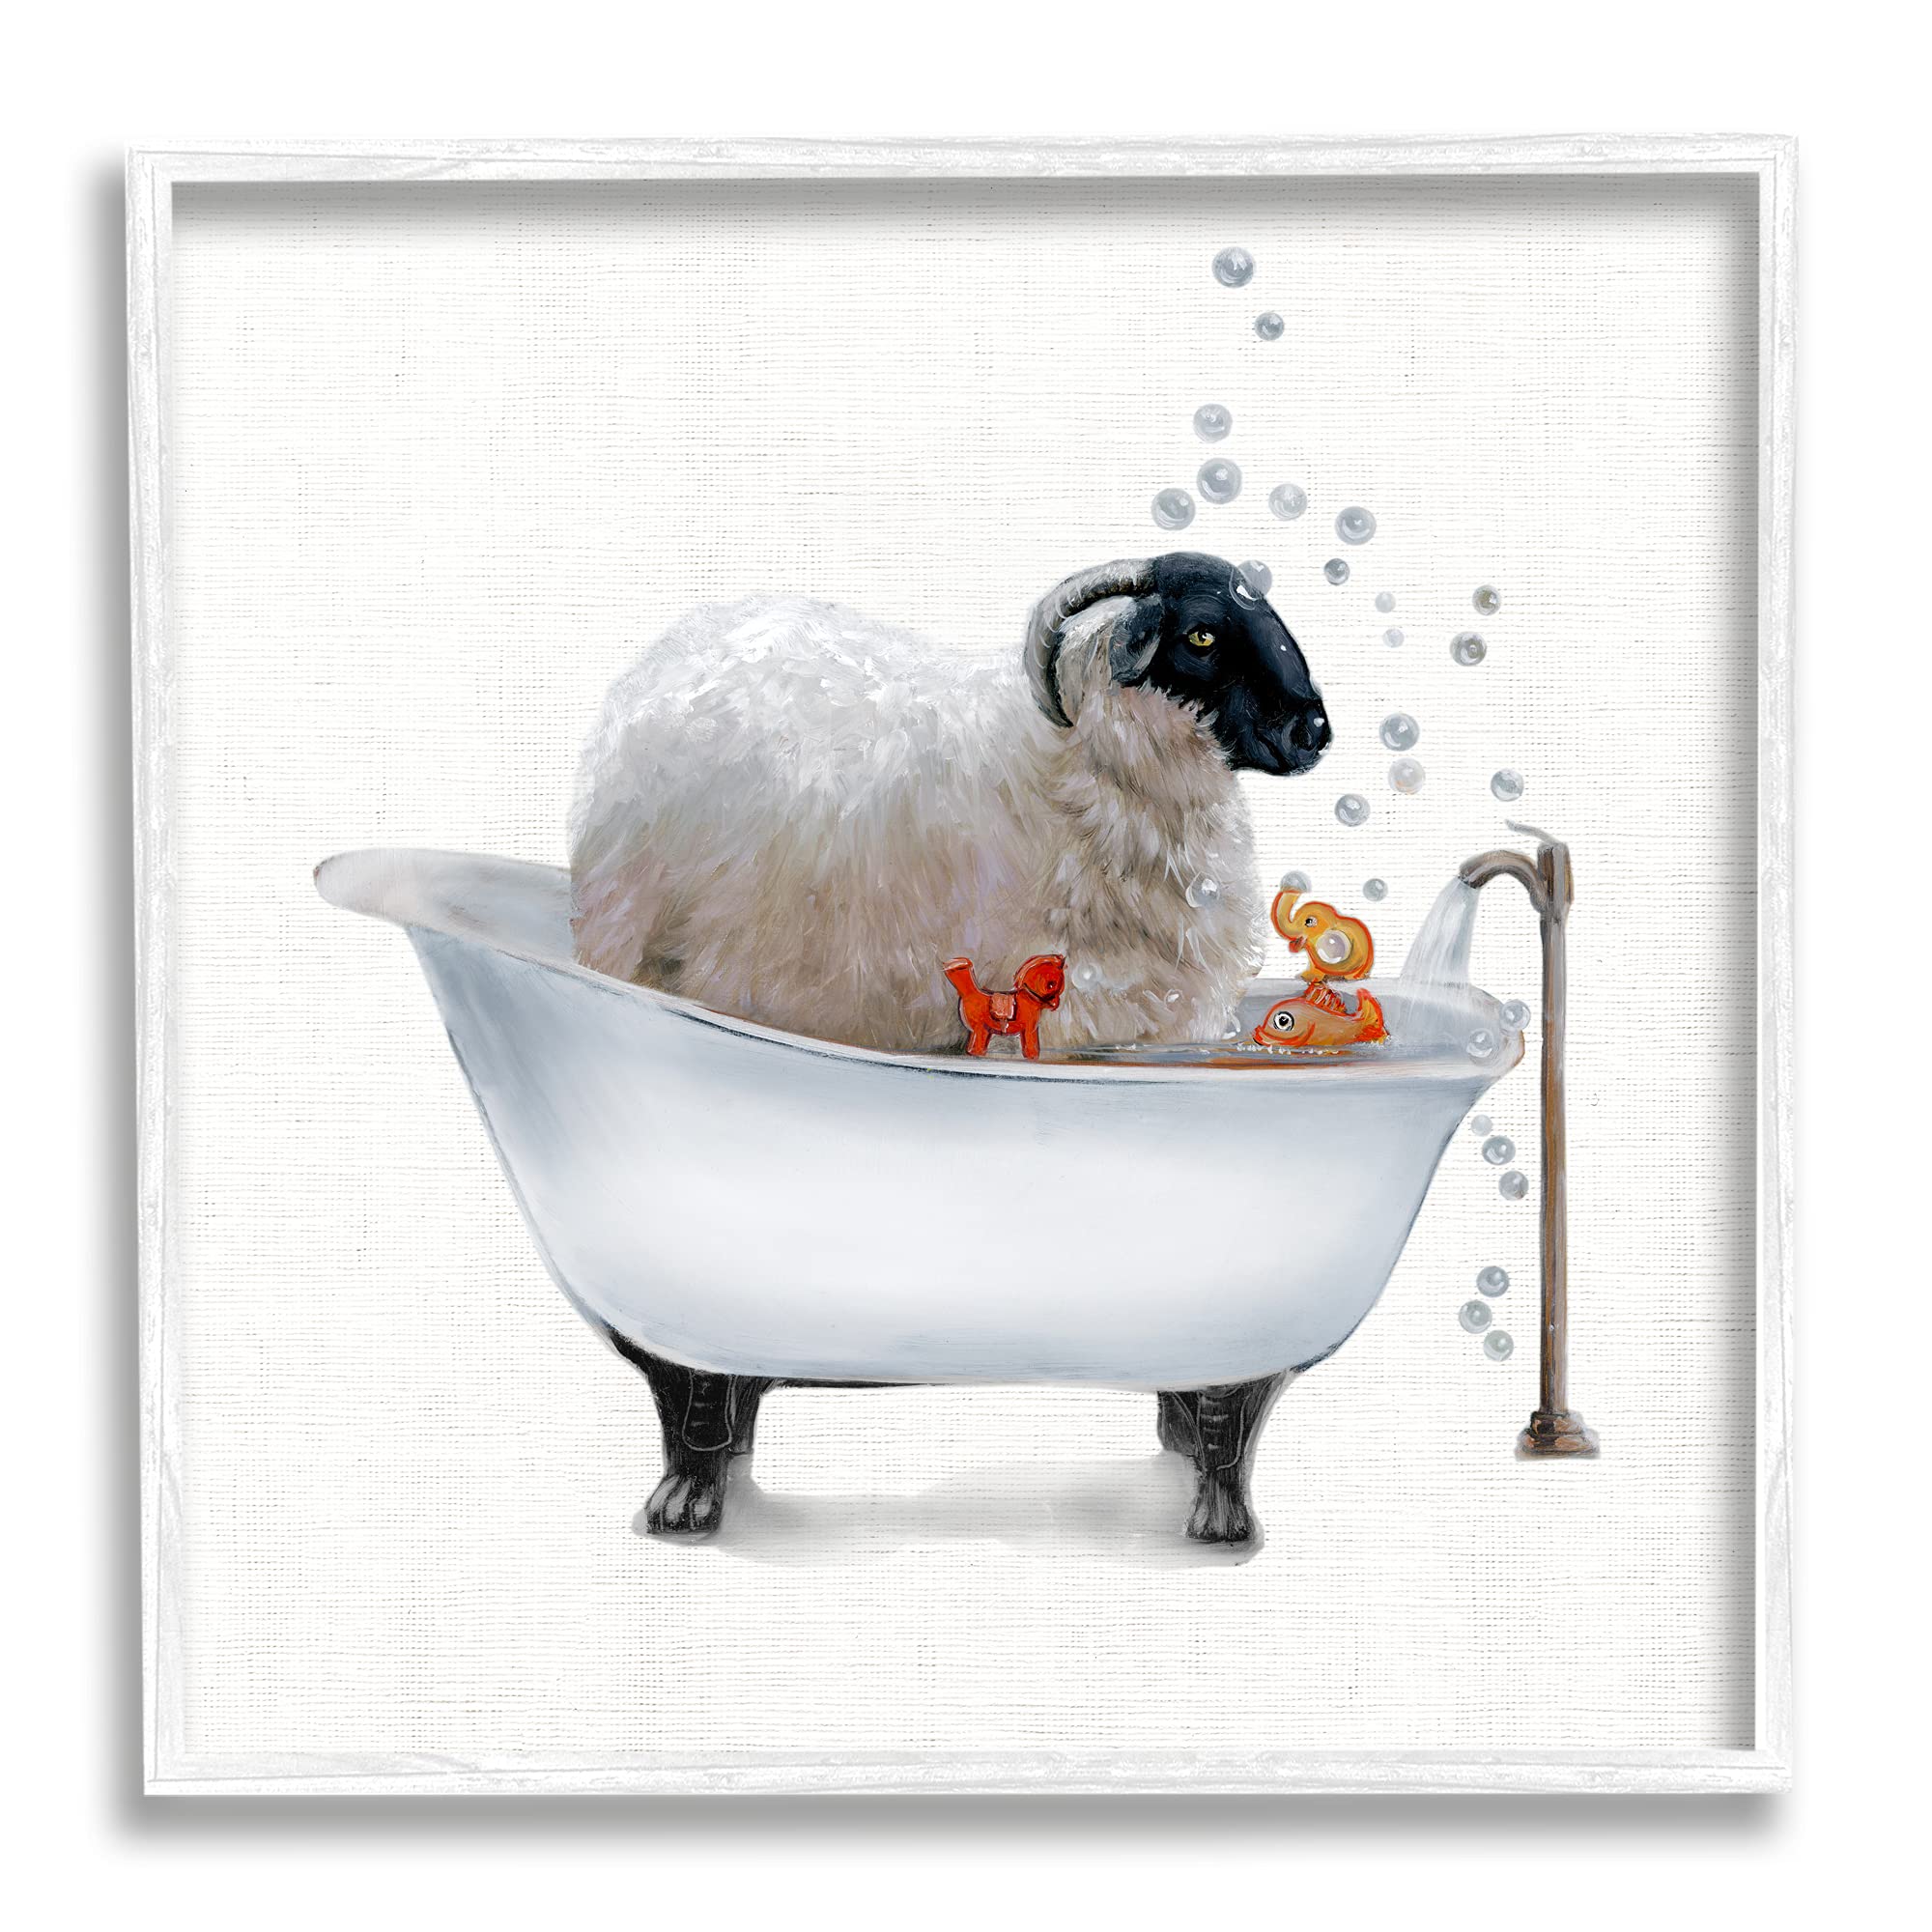 Stupell Industries Fluffy County Goat in Bathtub Soap Bubbles, Designed by Donna Brooks White Framed Wall Art, 24 x 24, Grey